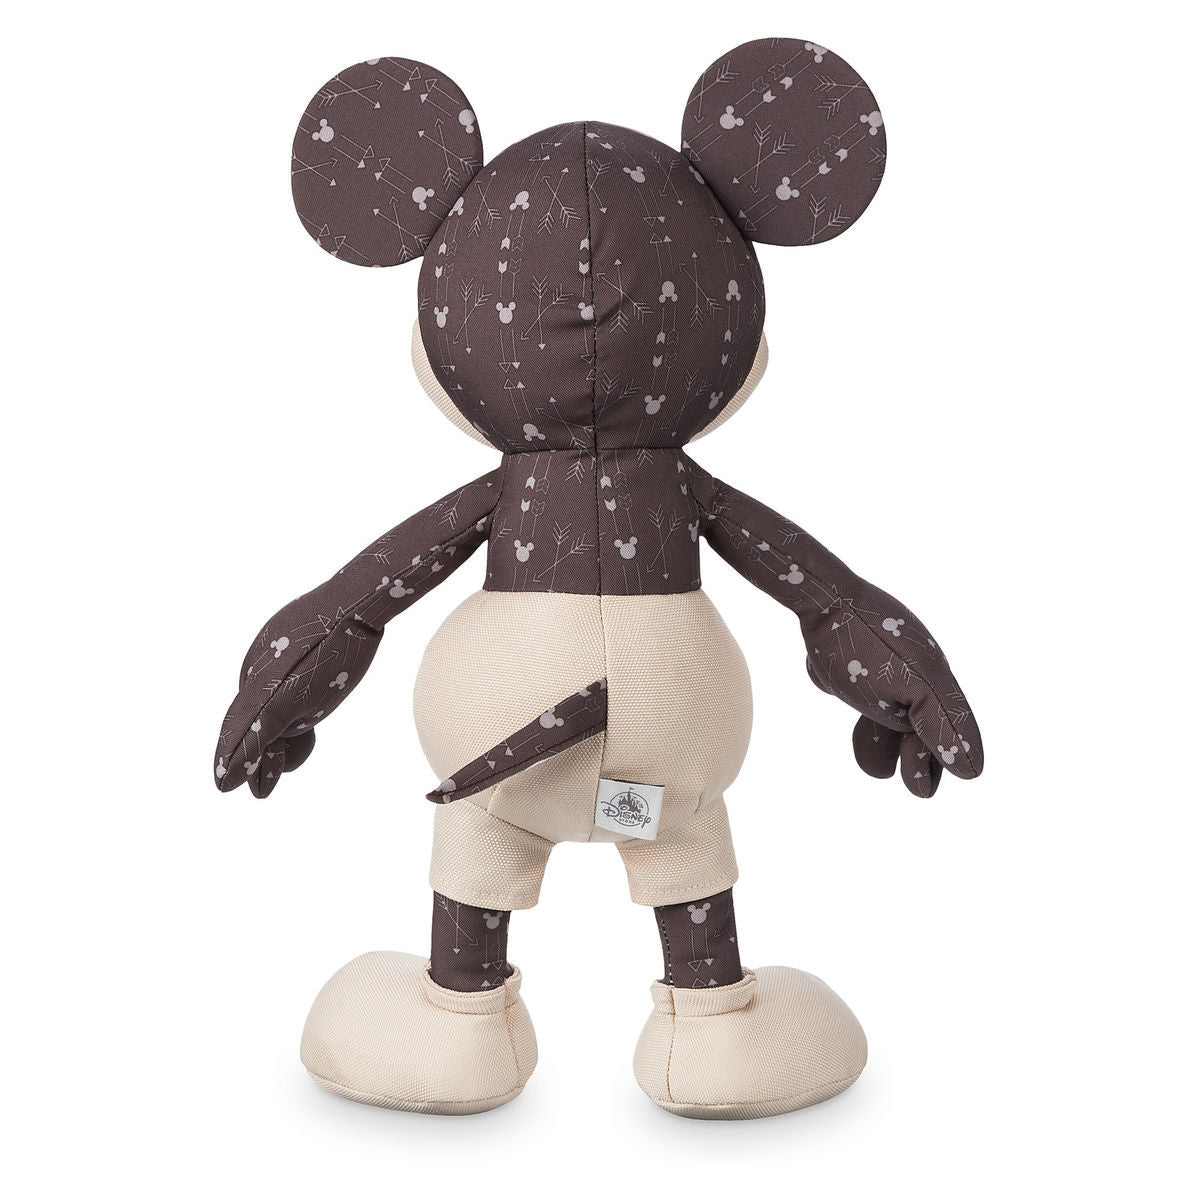 Disney Store Mickey Mouse Memories November Limited Plush New with Tags